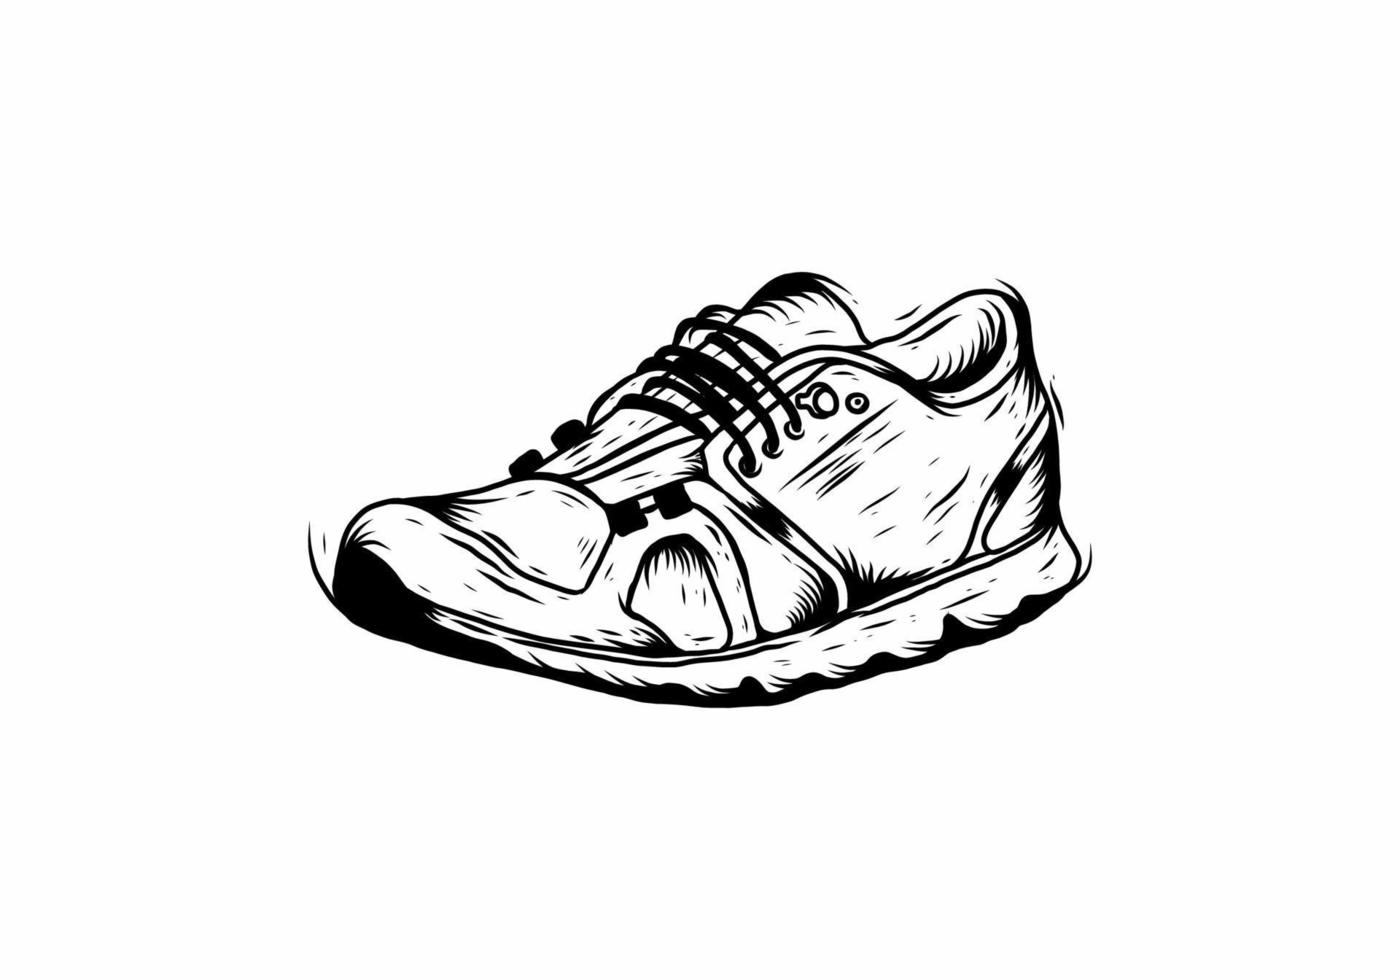 Black line art drawing of modern shoes vector